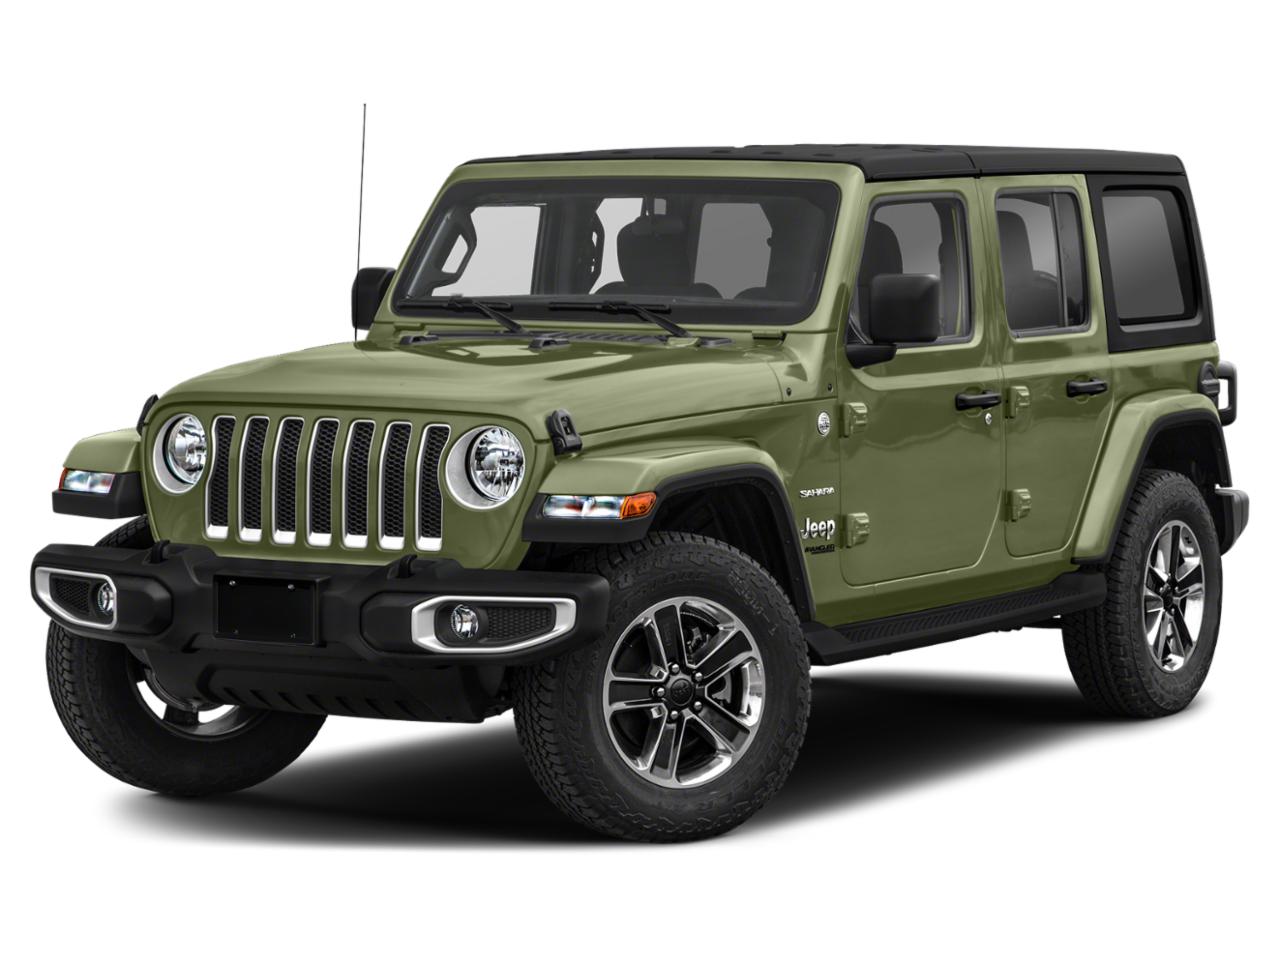 Used 2021 Jeep Wrangler For Sale in JERSEY VILLAGE, TX - Green  1C4HJXENXMW729462